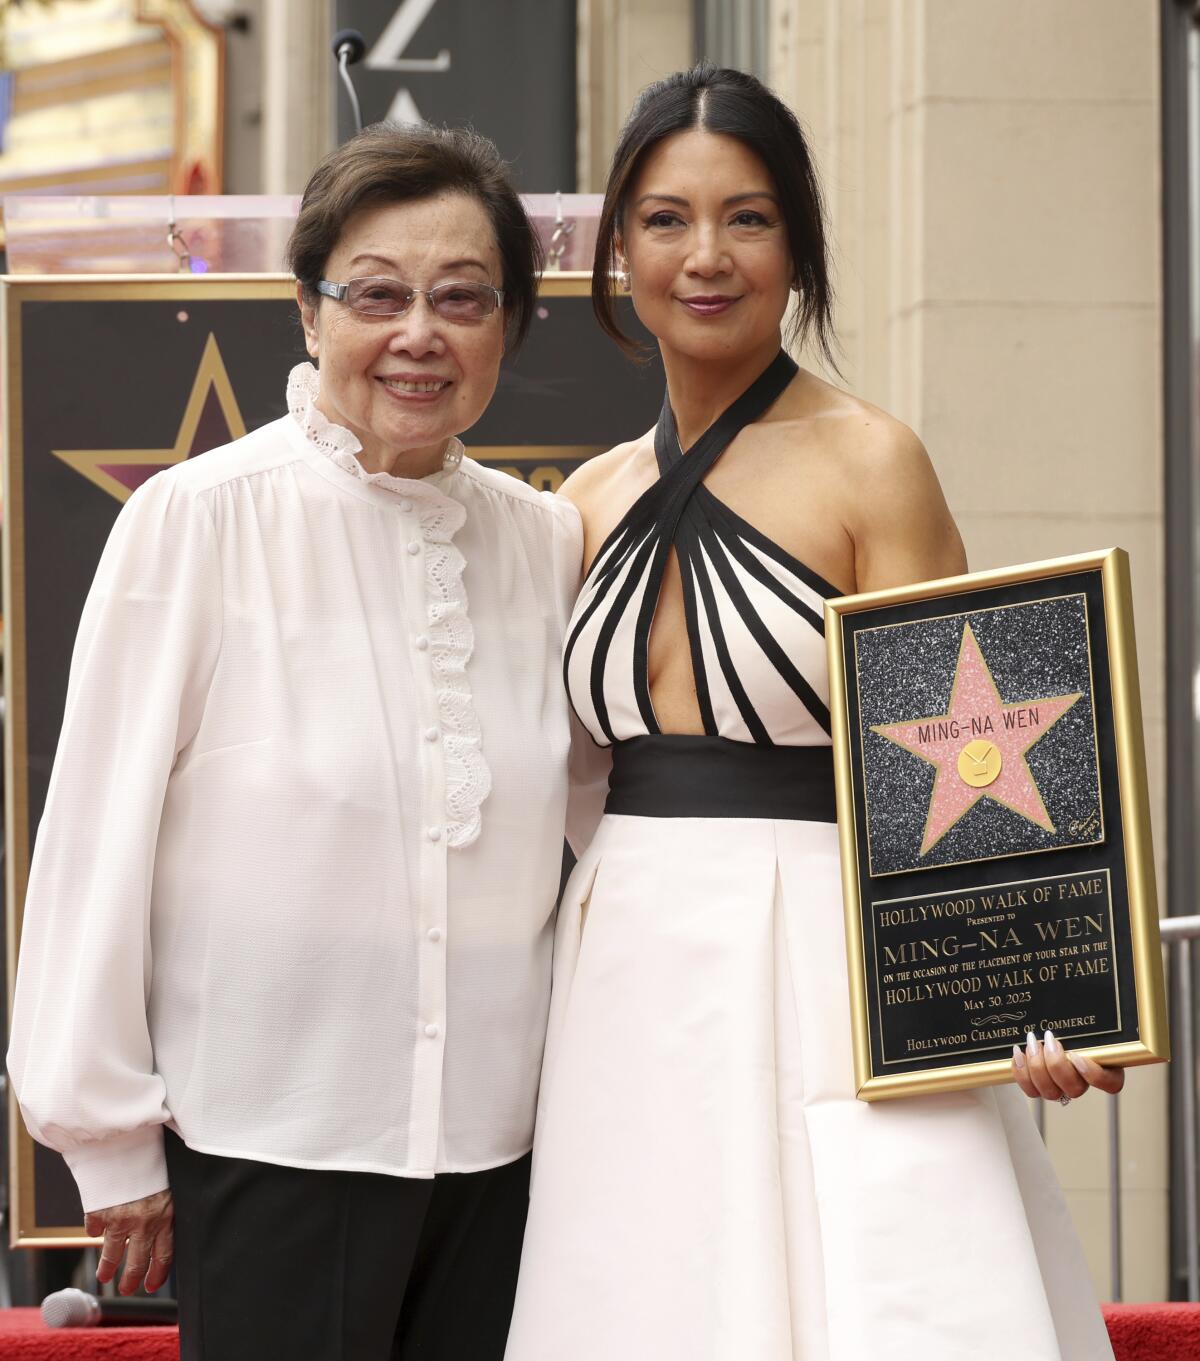 Ming-Na Wen in a white dress with black accents, stands beside her mom.